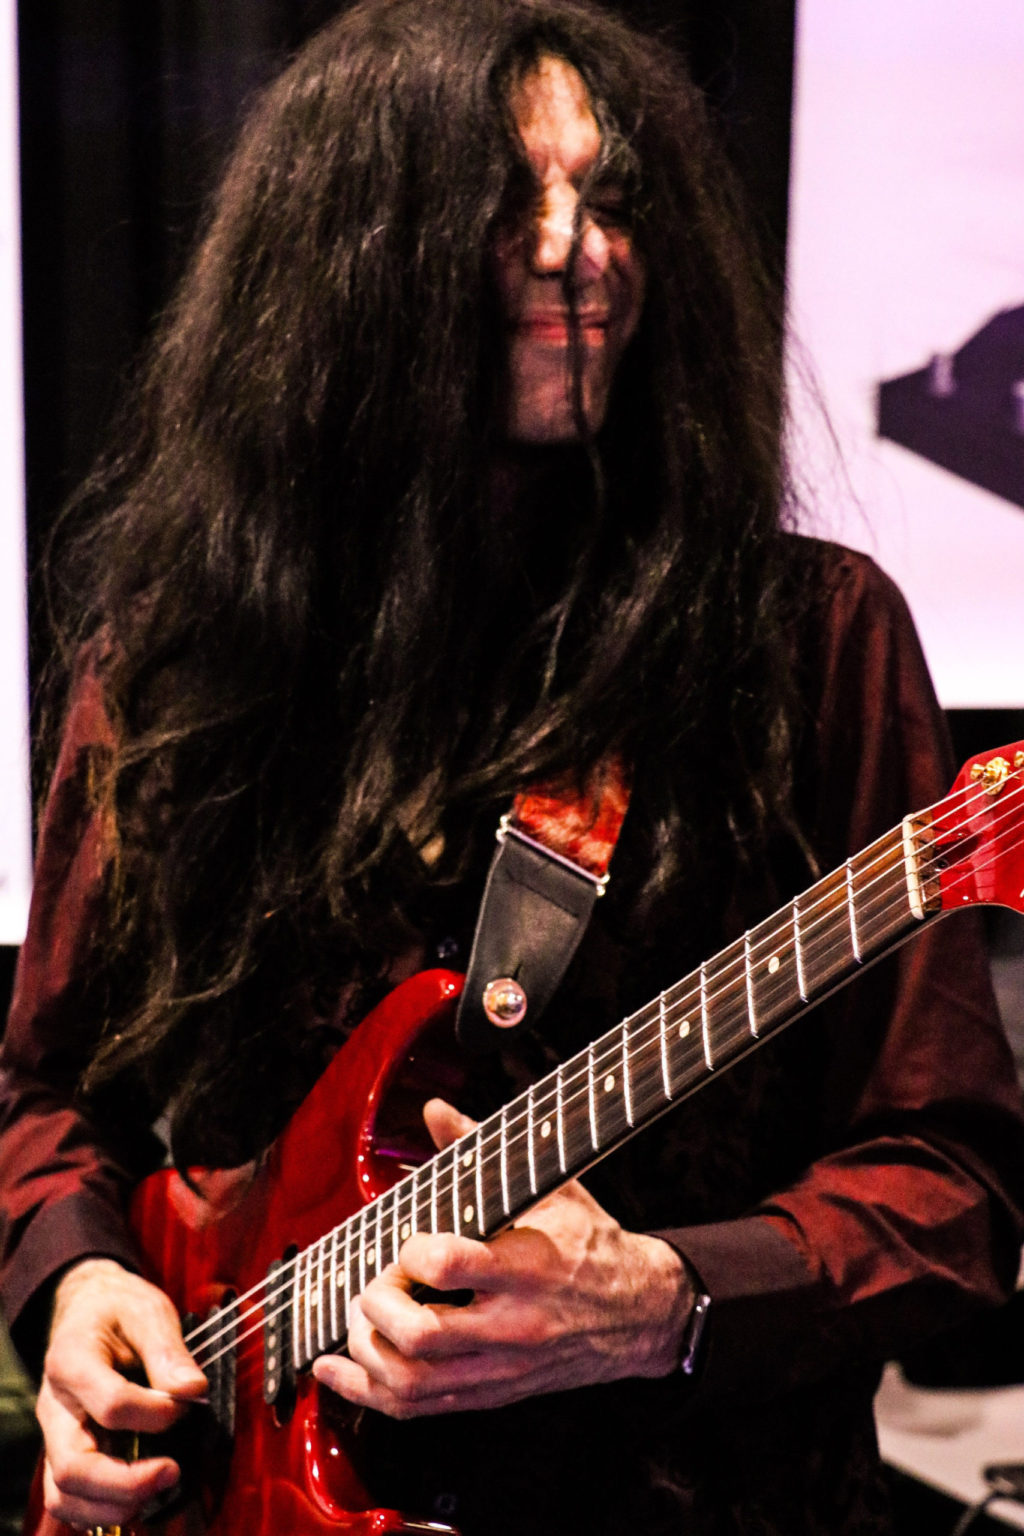 Mike Campese NAMM 2017 Performance